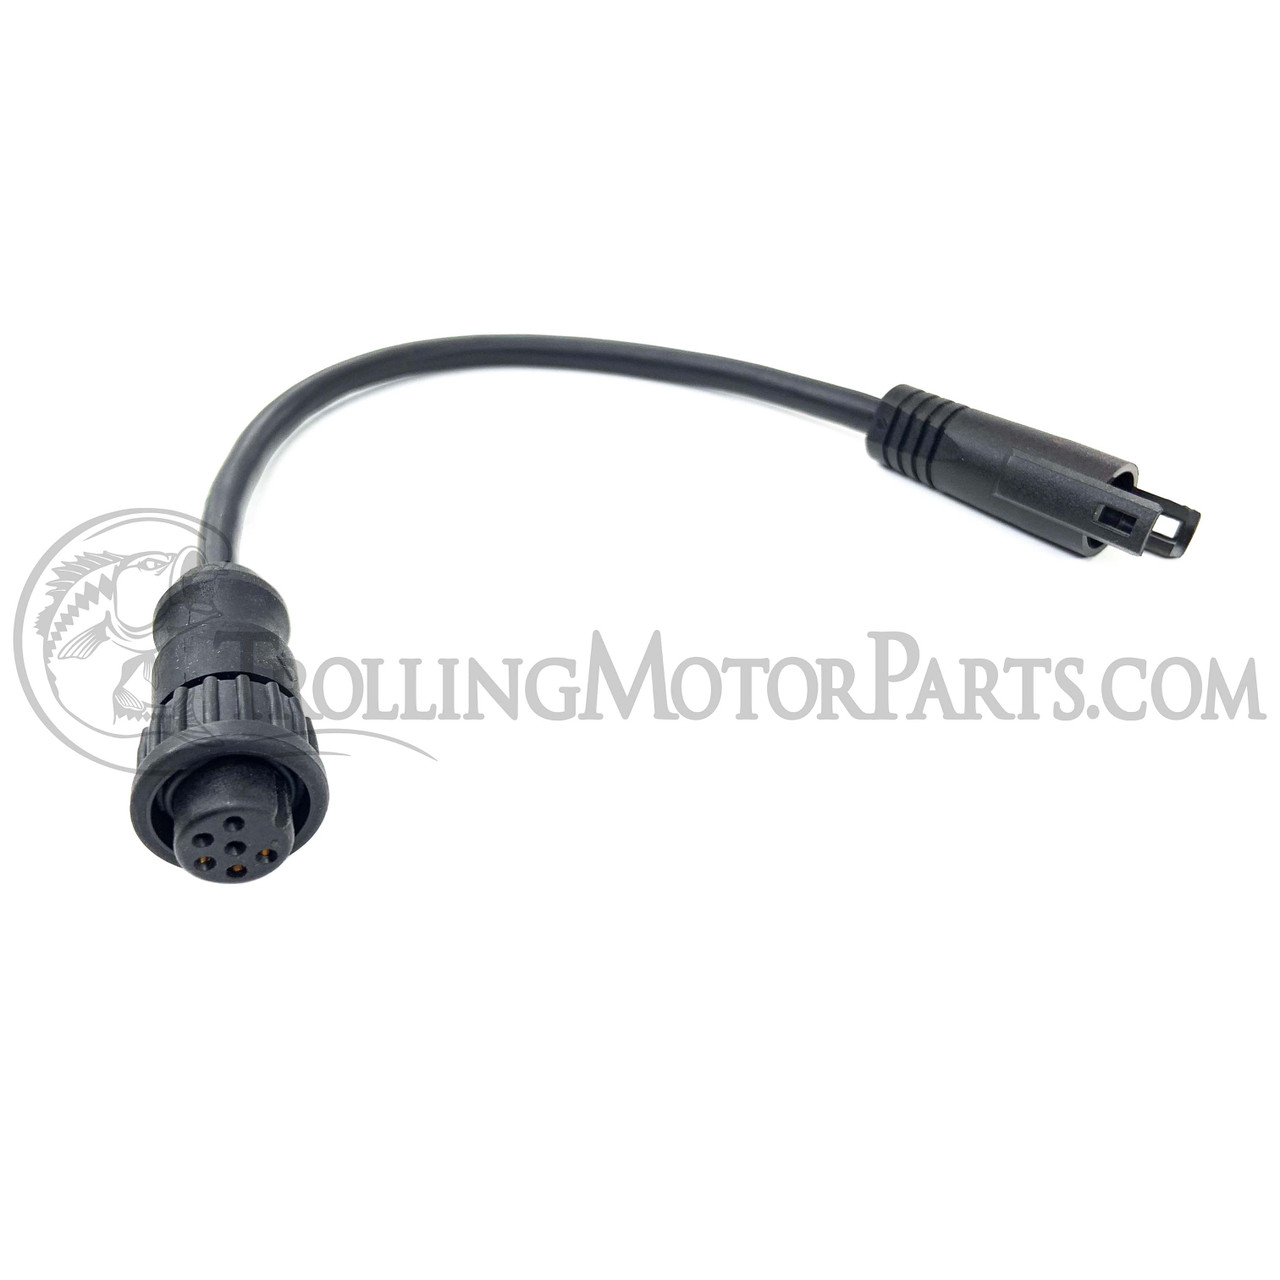 Motor Guide Lowrance 6-Pin Sonar Adapter Cable 